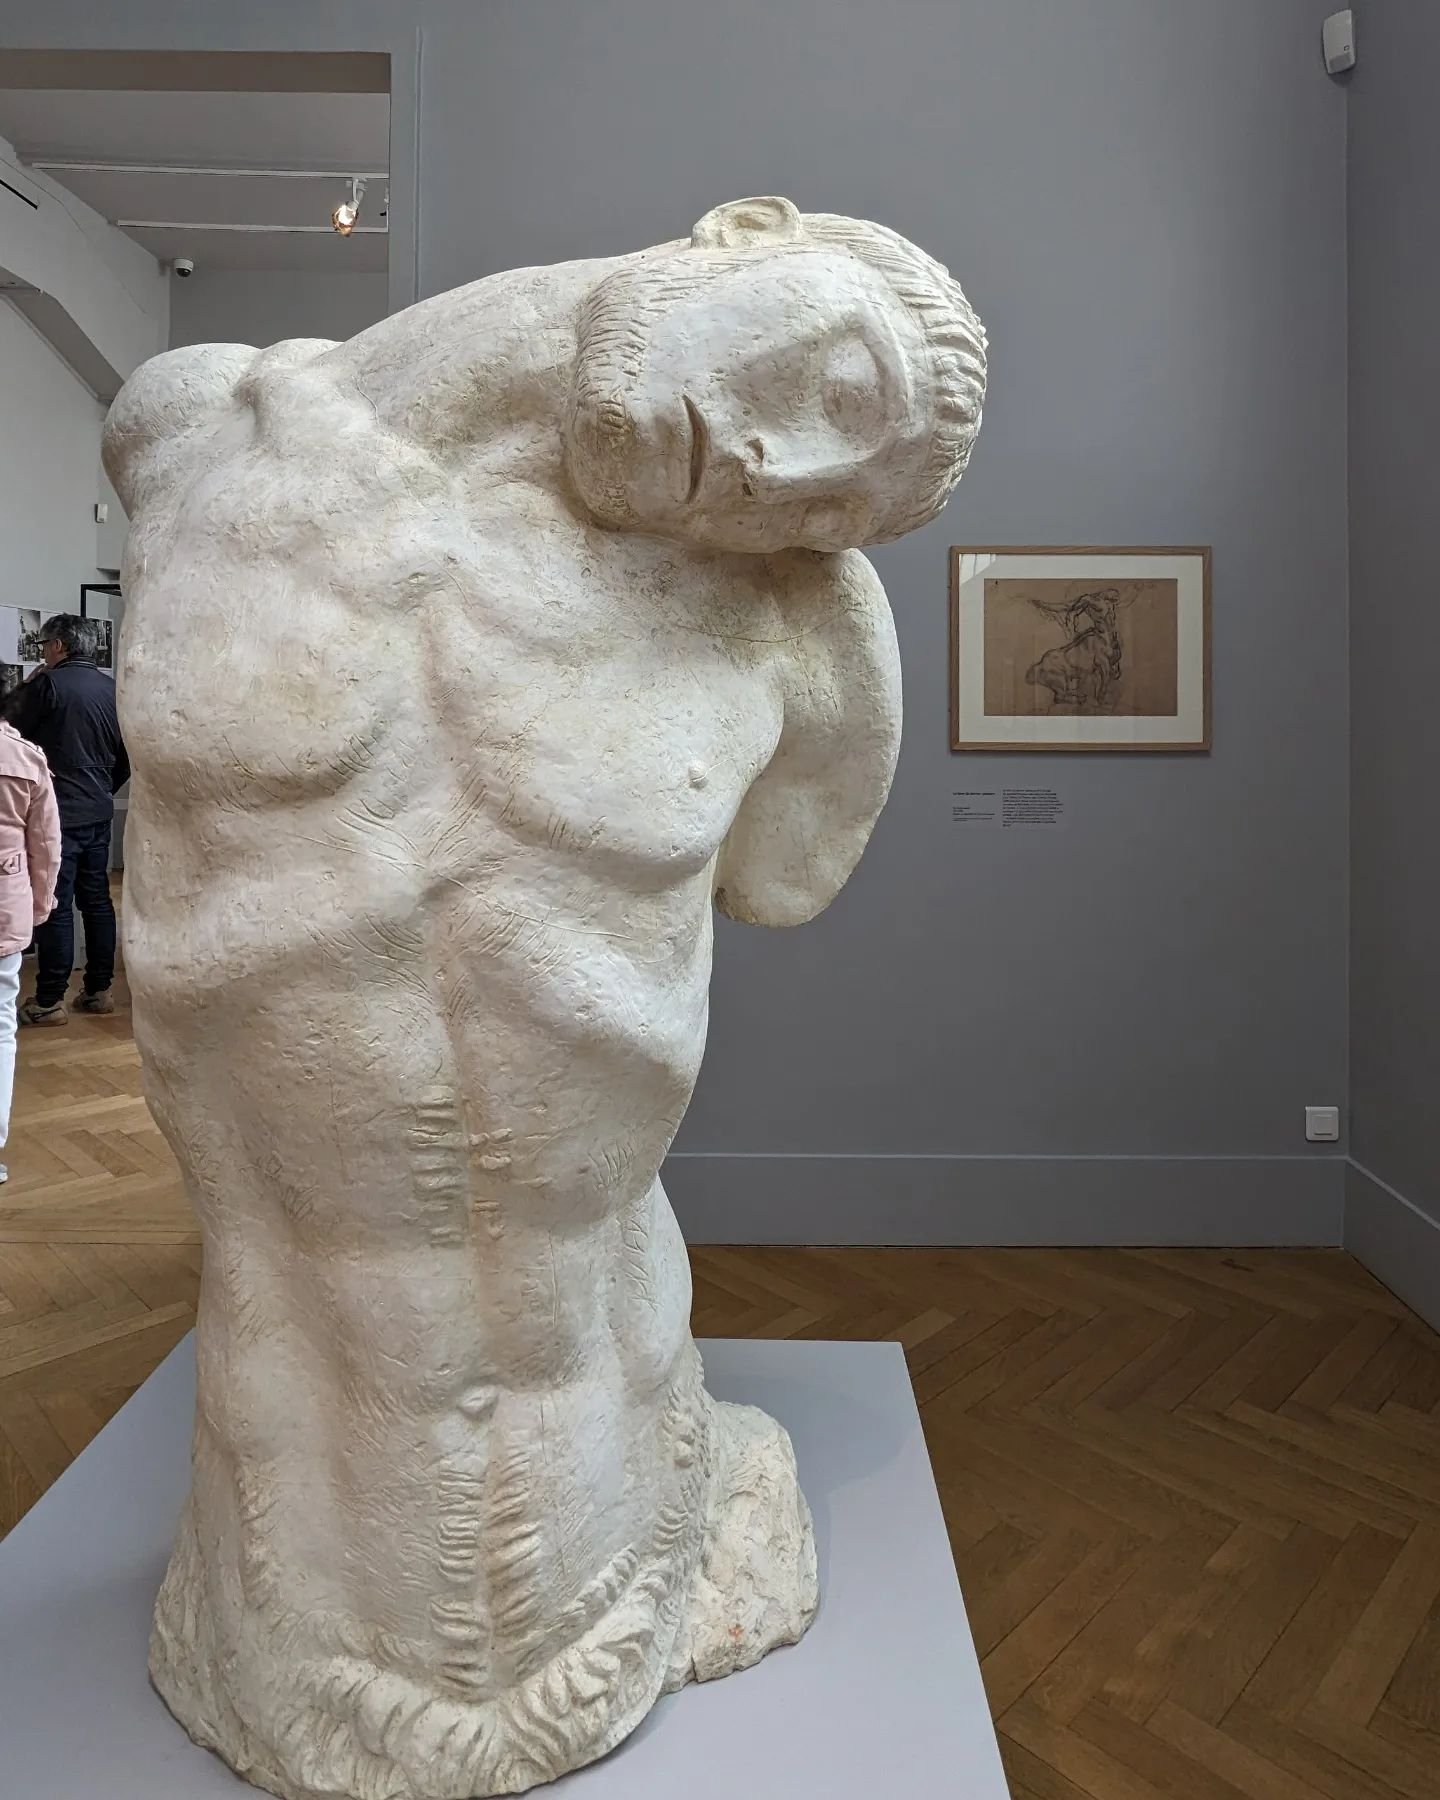 Antoine Bourdelle, Centaure mourant (Dying Centaur), 1914, plaster @museebourdelle

This is one of the most beautiful artworks I have ever seen. I did not expect this to hit me so hard, but it was crying-in-the-gallery-moment for me (it's only ever h